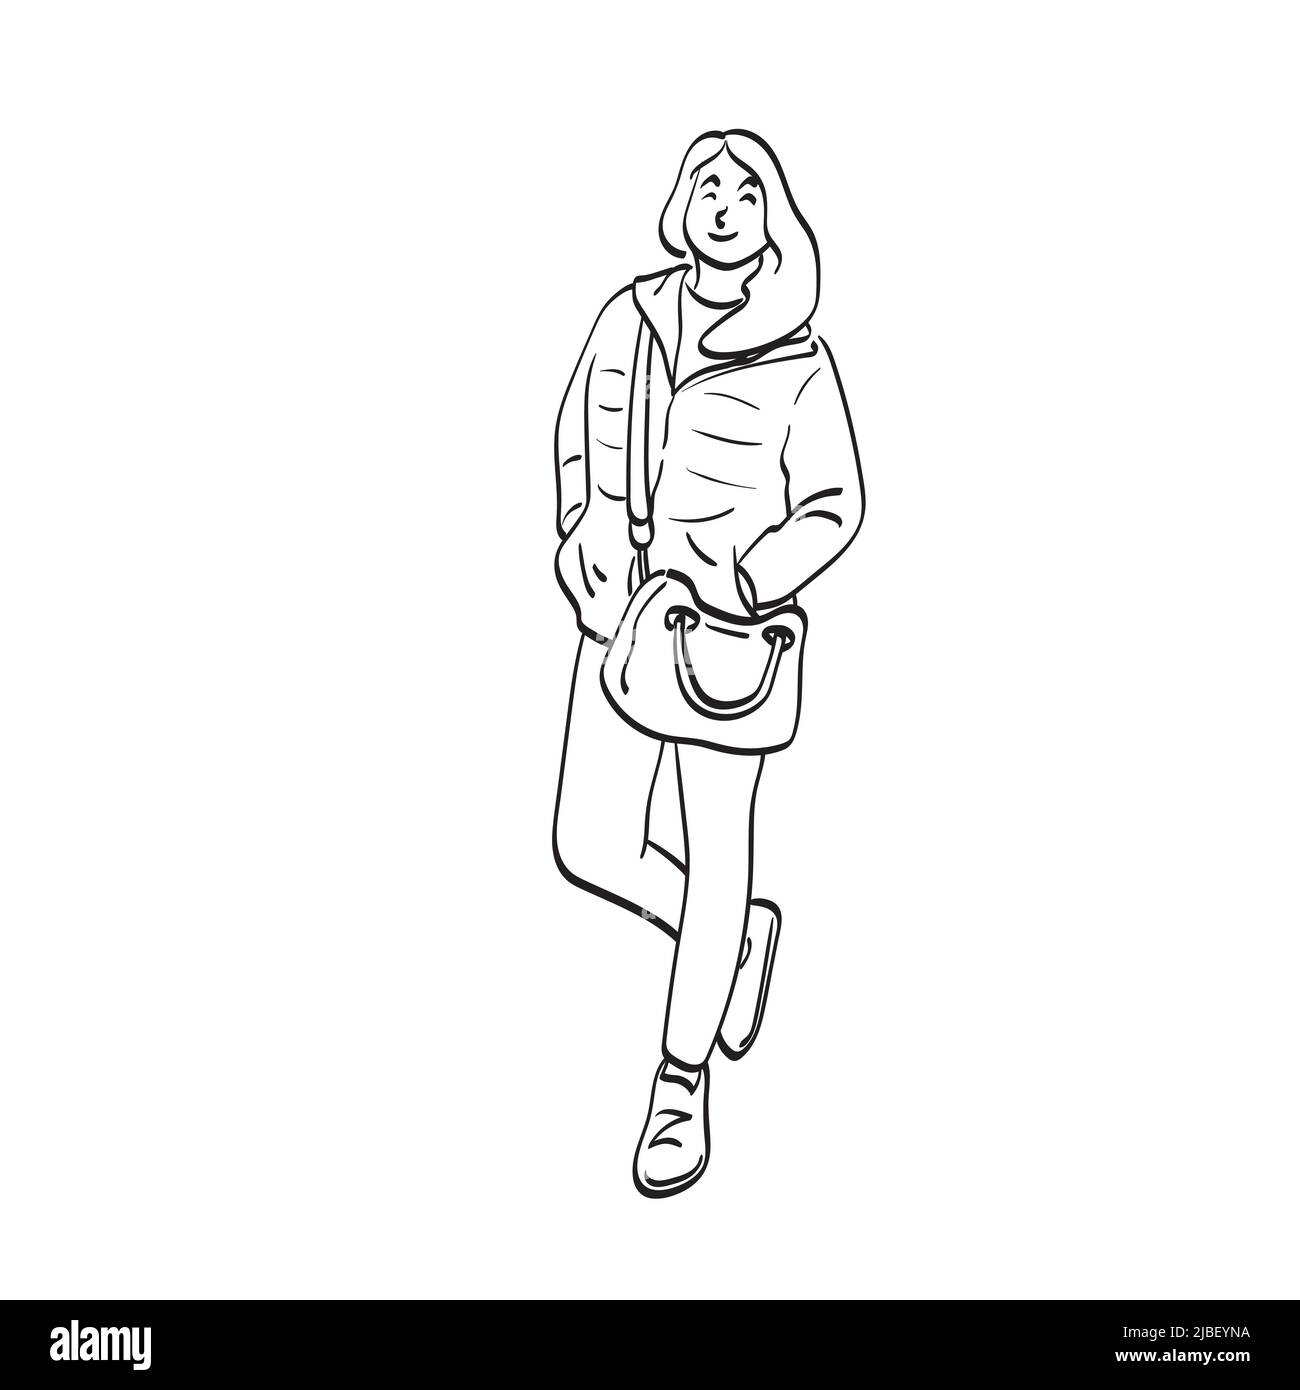 line art smiling woman with bag standing on one leg illustration vector hand drawn isolated on white background Stock Vector